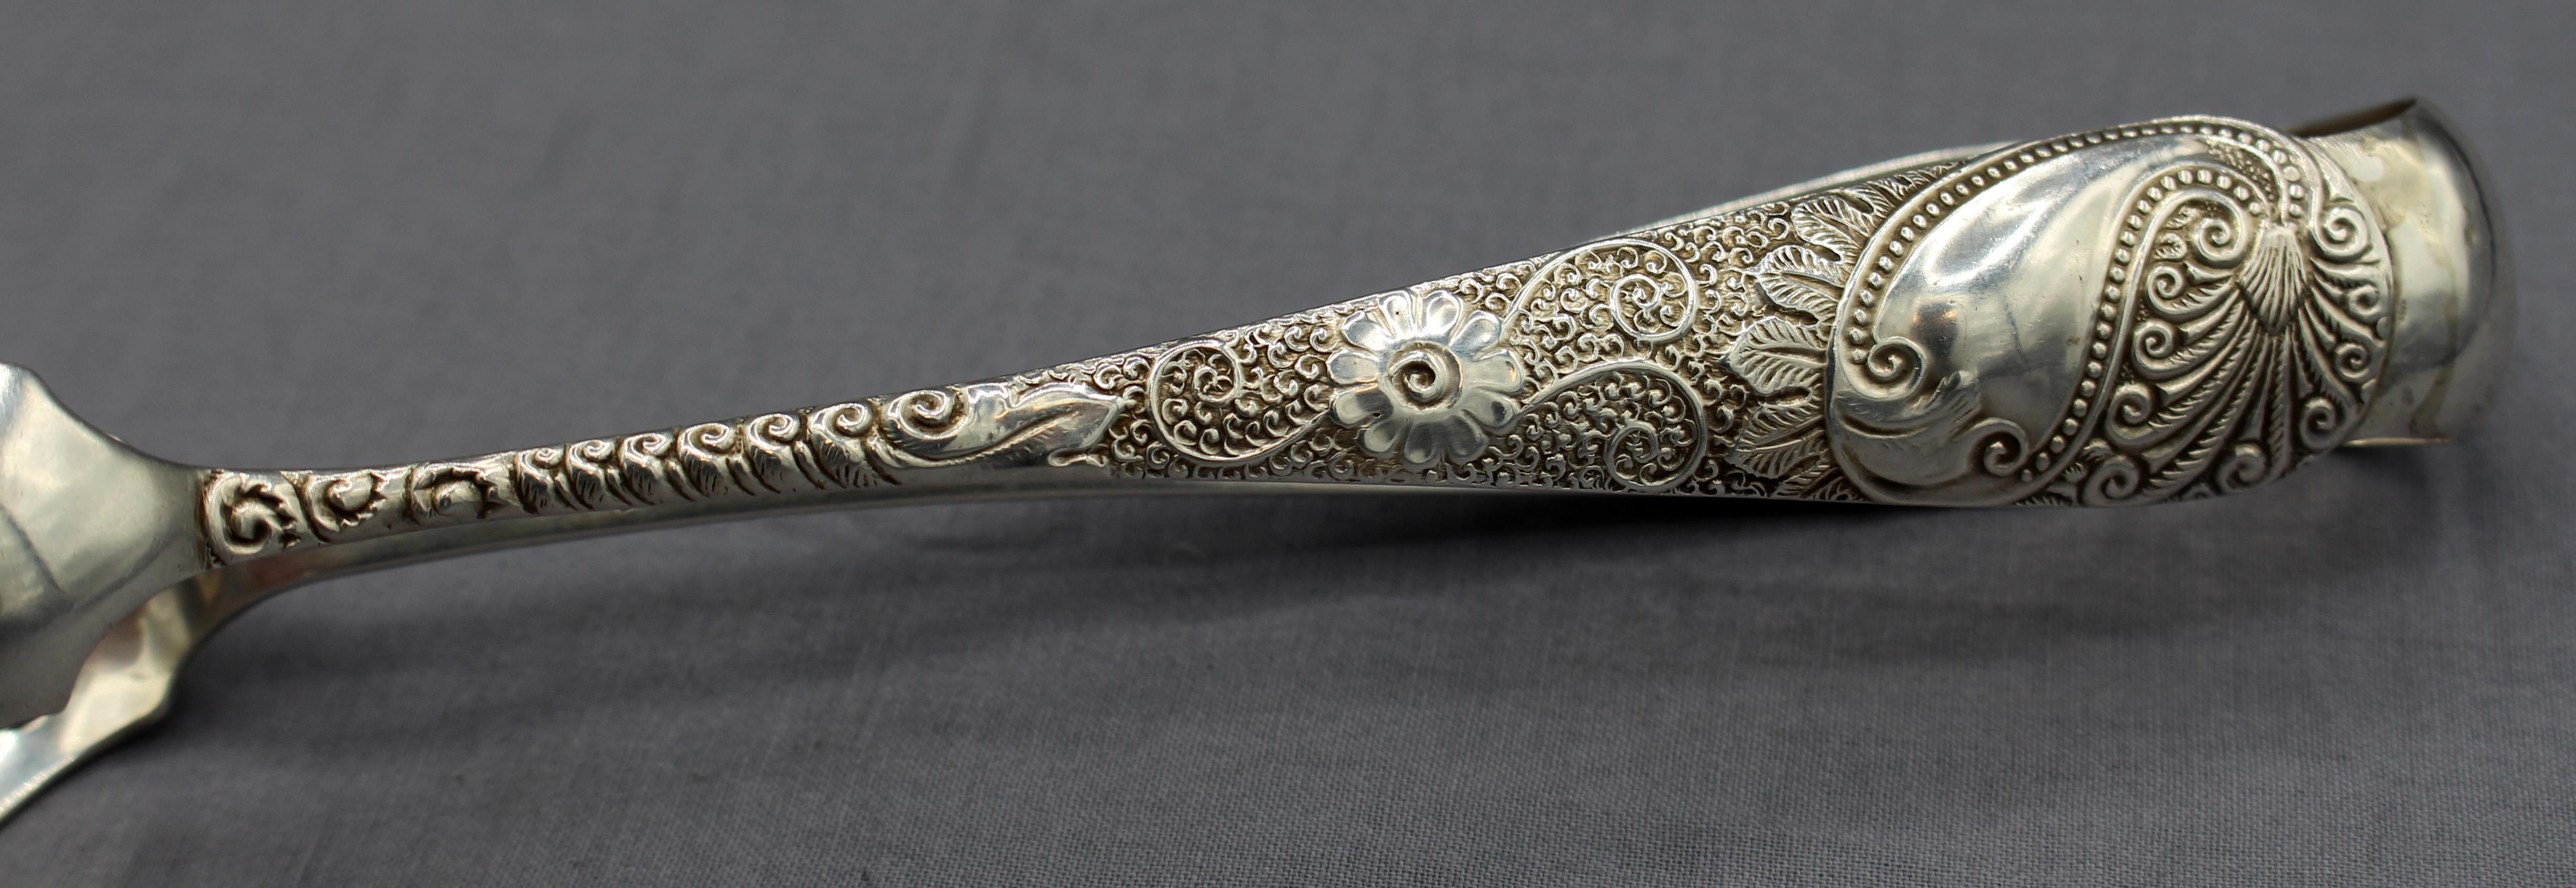 Sterling silver ice tongs made in Baltimore, c.1870-80s. By John C.C. Justice & James R. Armiger. Superb Aesthetic Movement design. Old, fine repair. 1877-1892 marks. 3 troy oz.
7.75